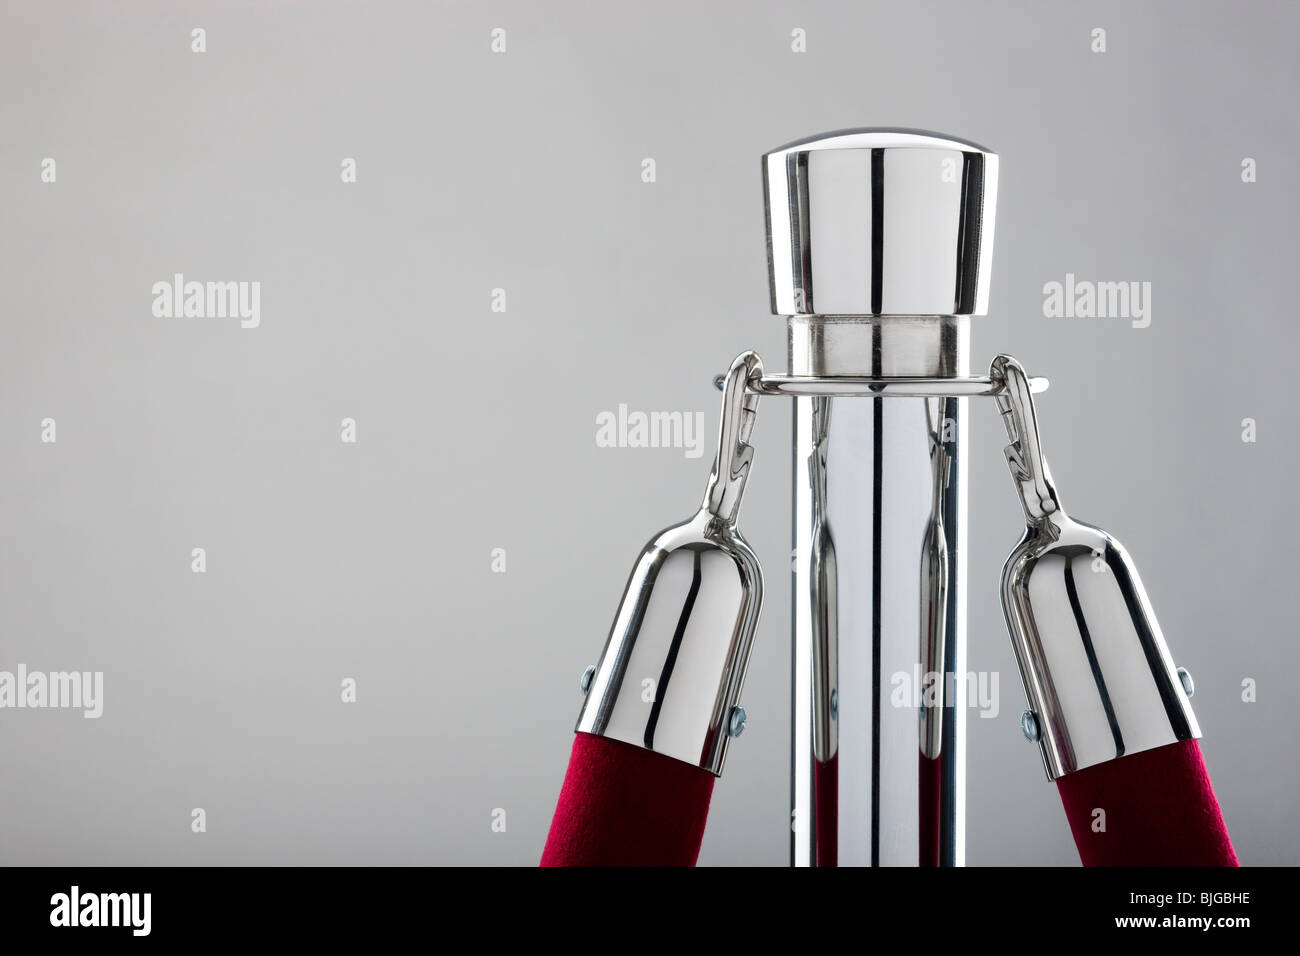 rope stand with a velvet rope attached Stock Photo